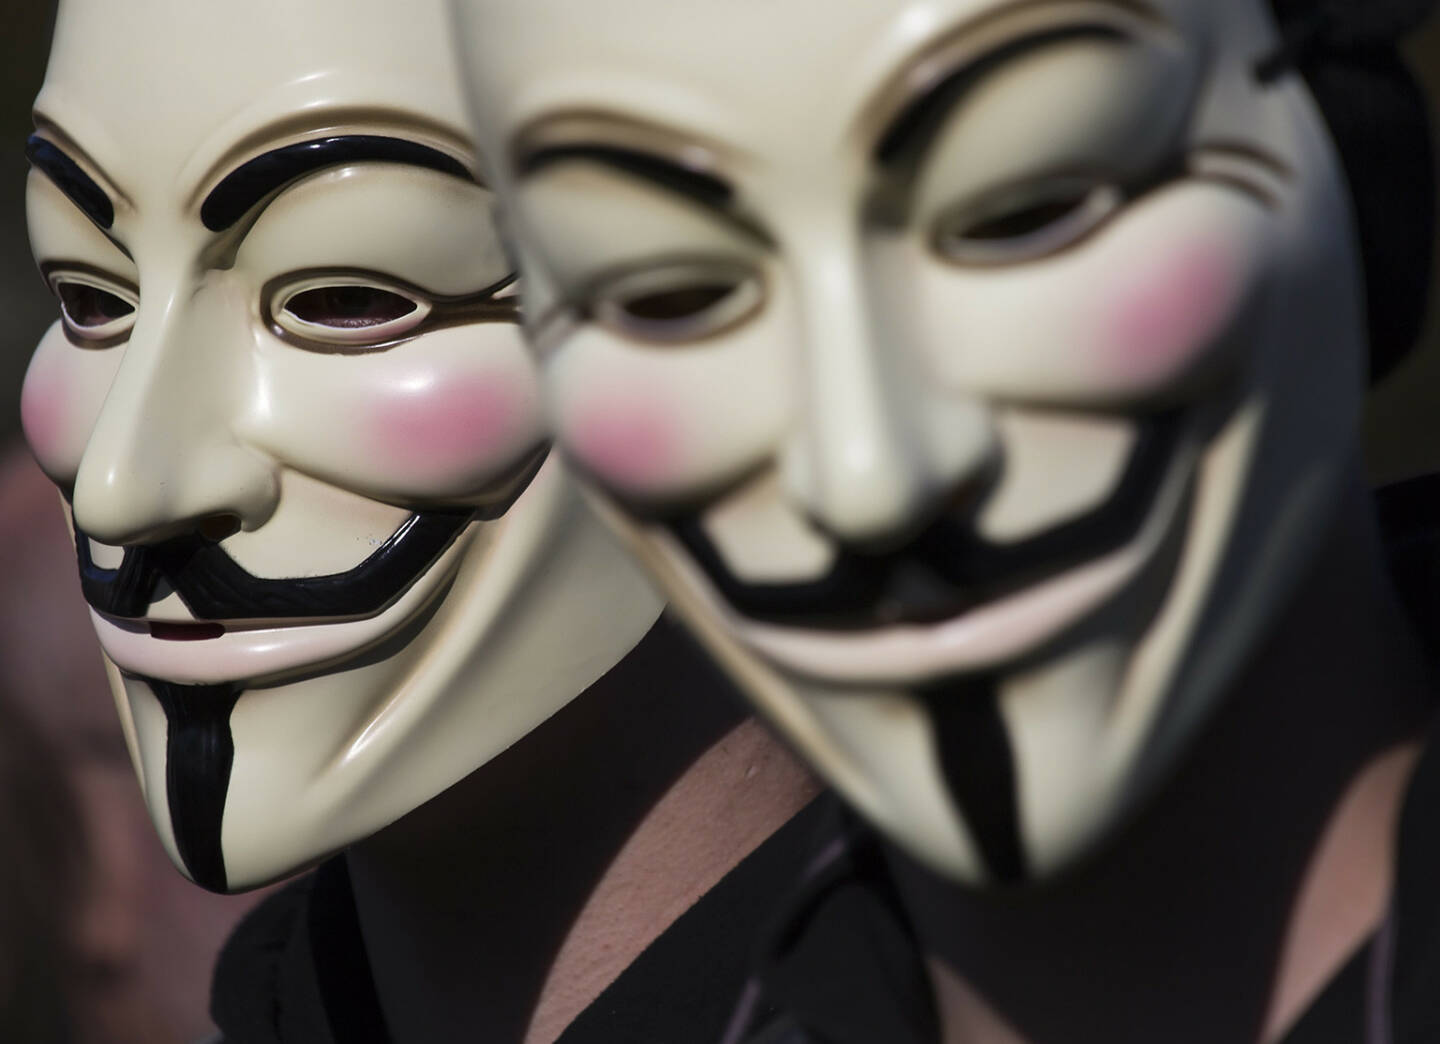 Anonymous , Occupy, Guy Fawkes Maske, <a href=http://www.shutterstock.com/gallery-169246p1.html?cr=00&pl=edit-00>Rob Kints</a> / <a href=http://www.shutterstock.com/?cr=00&pl=edit-00>Shutterstock.com</a>